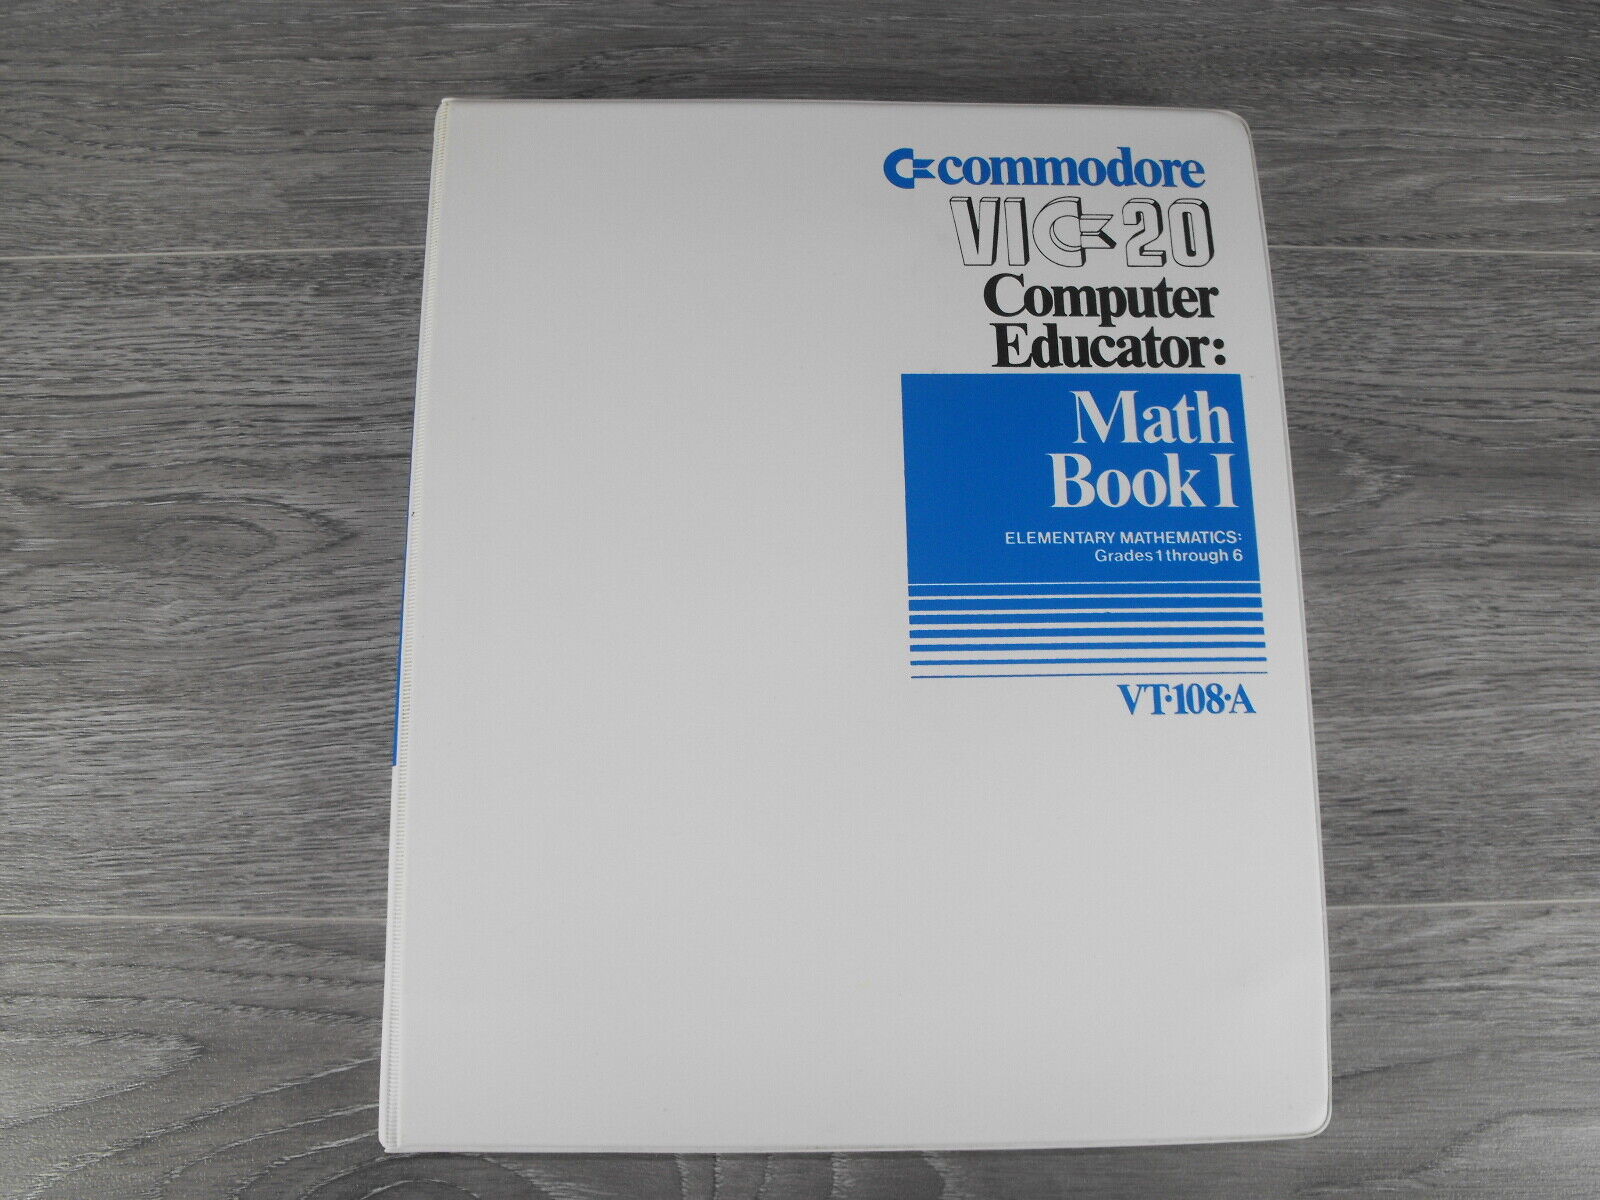 Math Book I VIC20 Commodore Computer Video Game Educational 6 Tapes Set VT-108-A